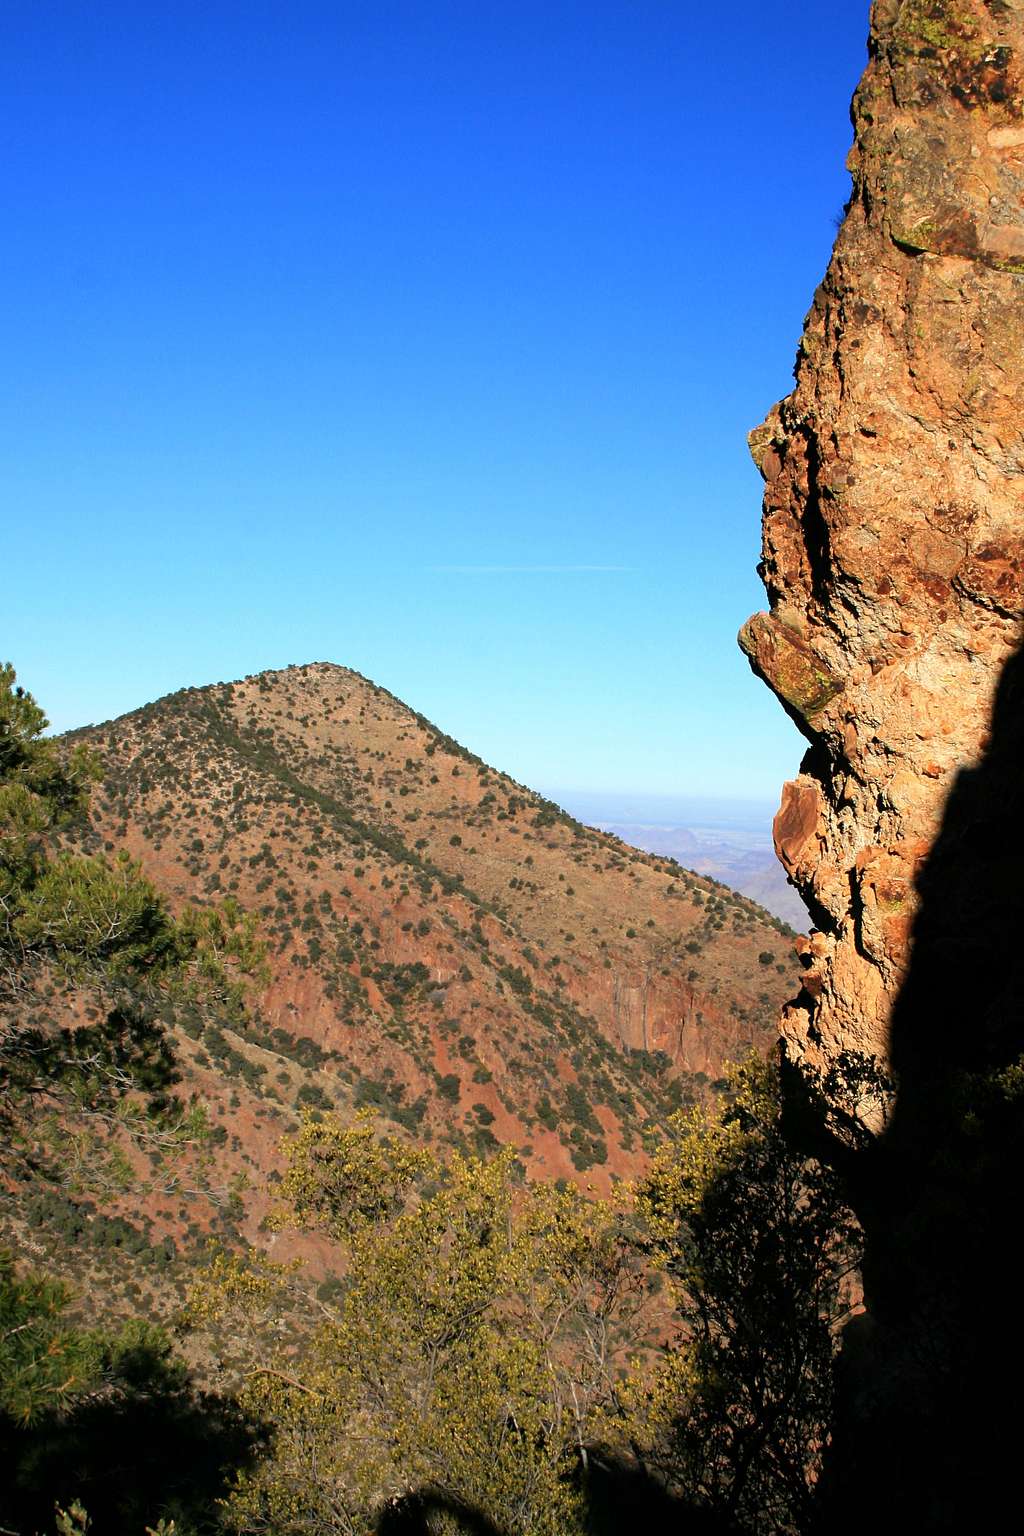 View on the Pinnacles Trail